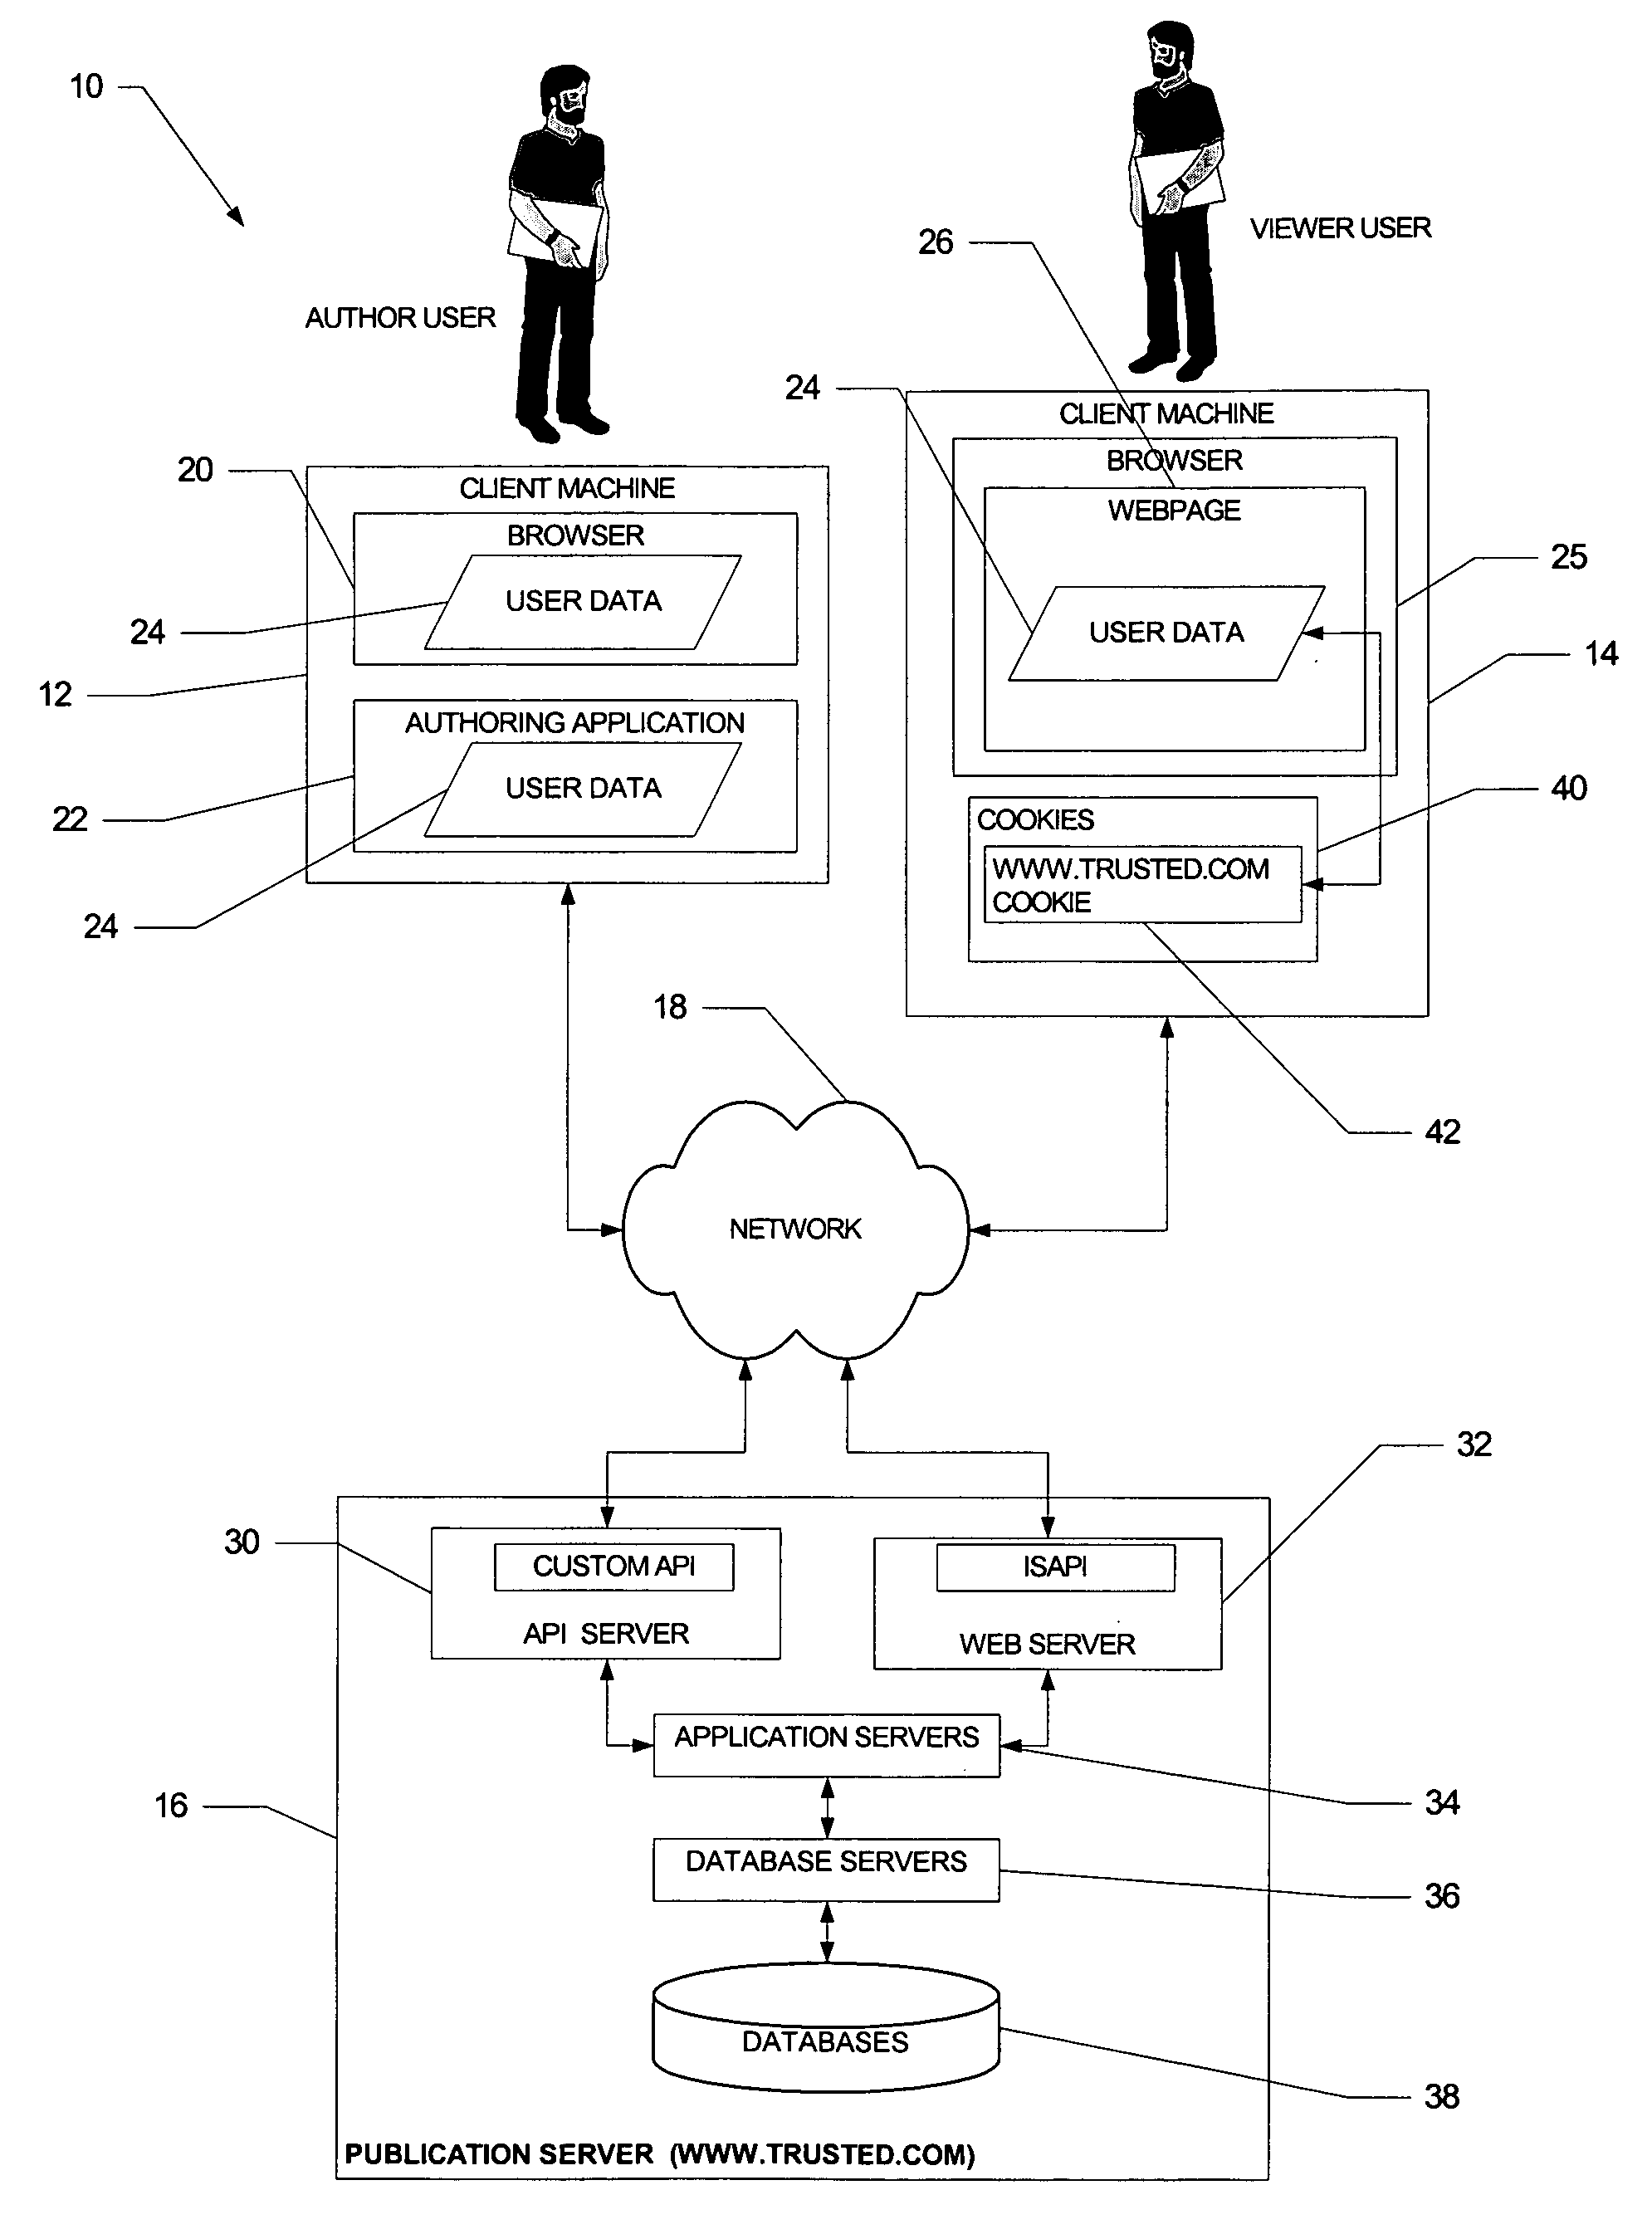 Method and system to modify function calls from within content published by a trusted web site